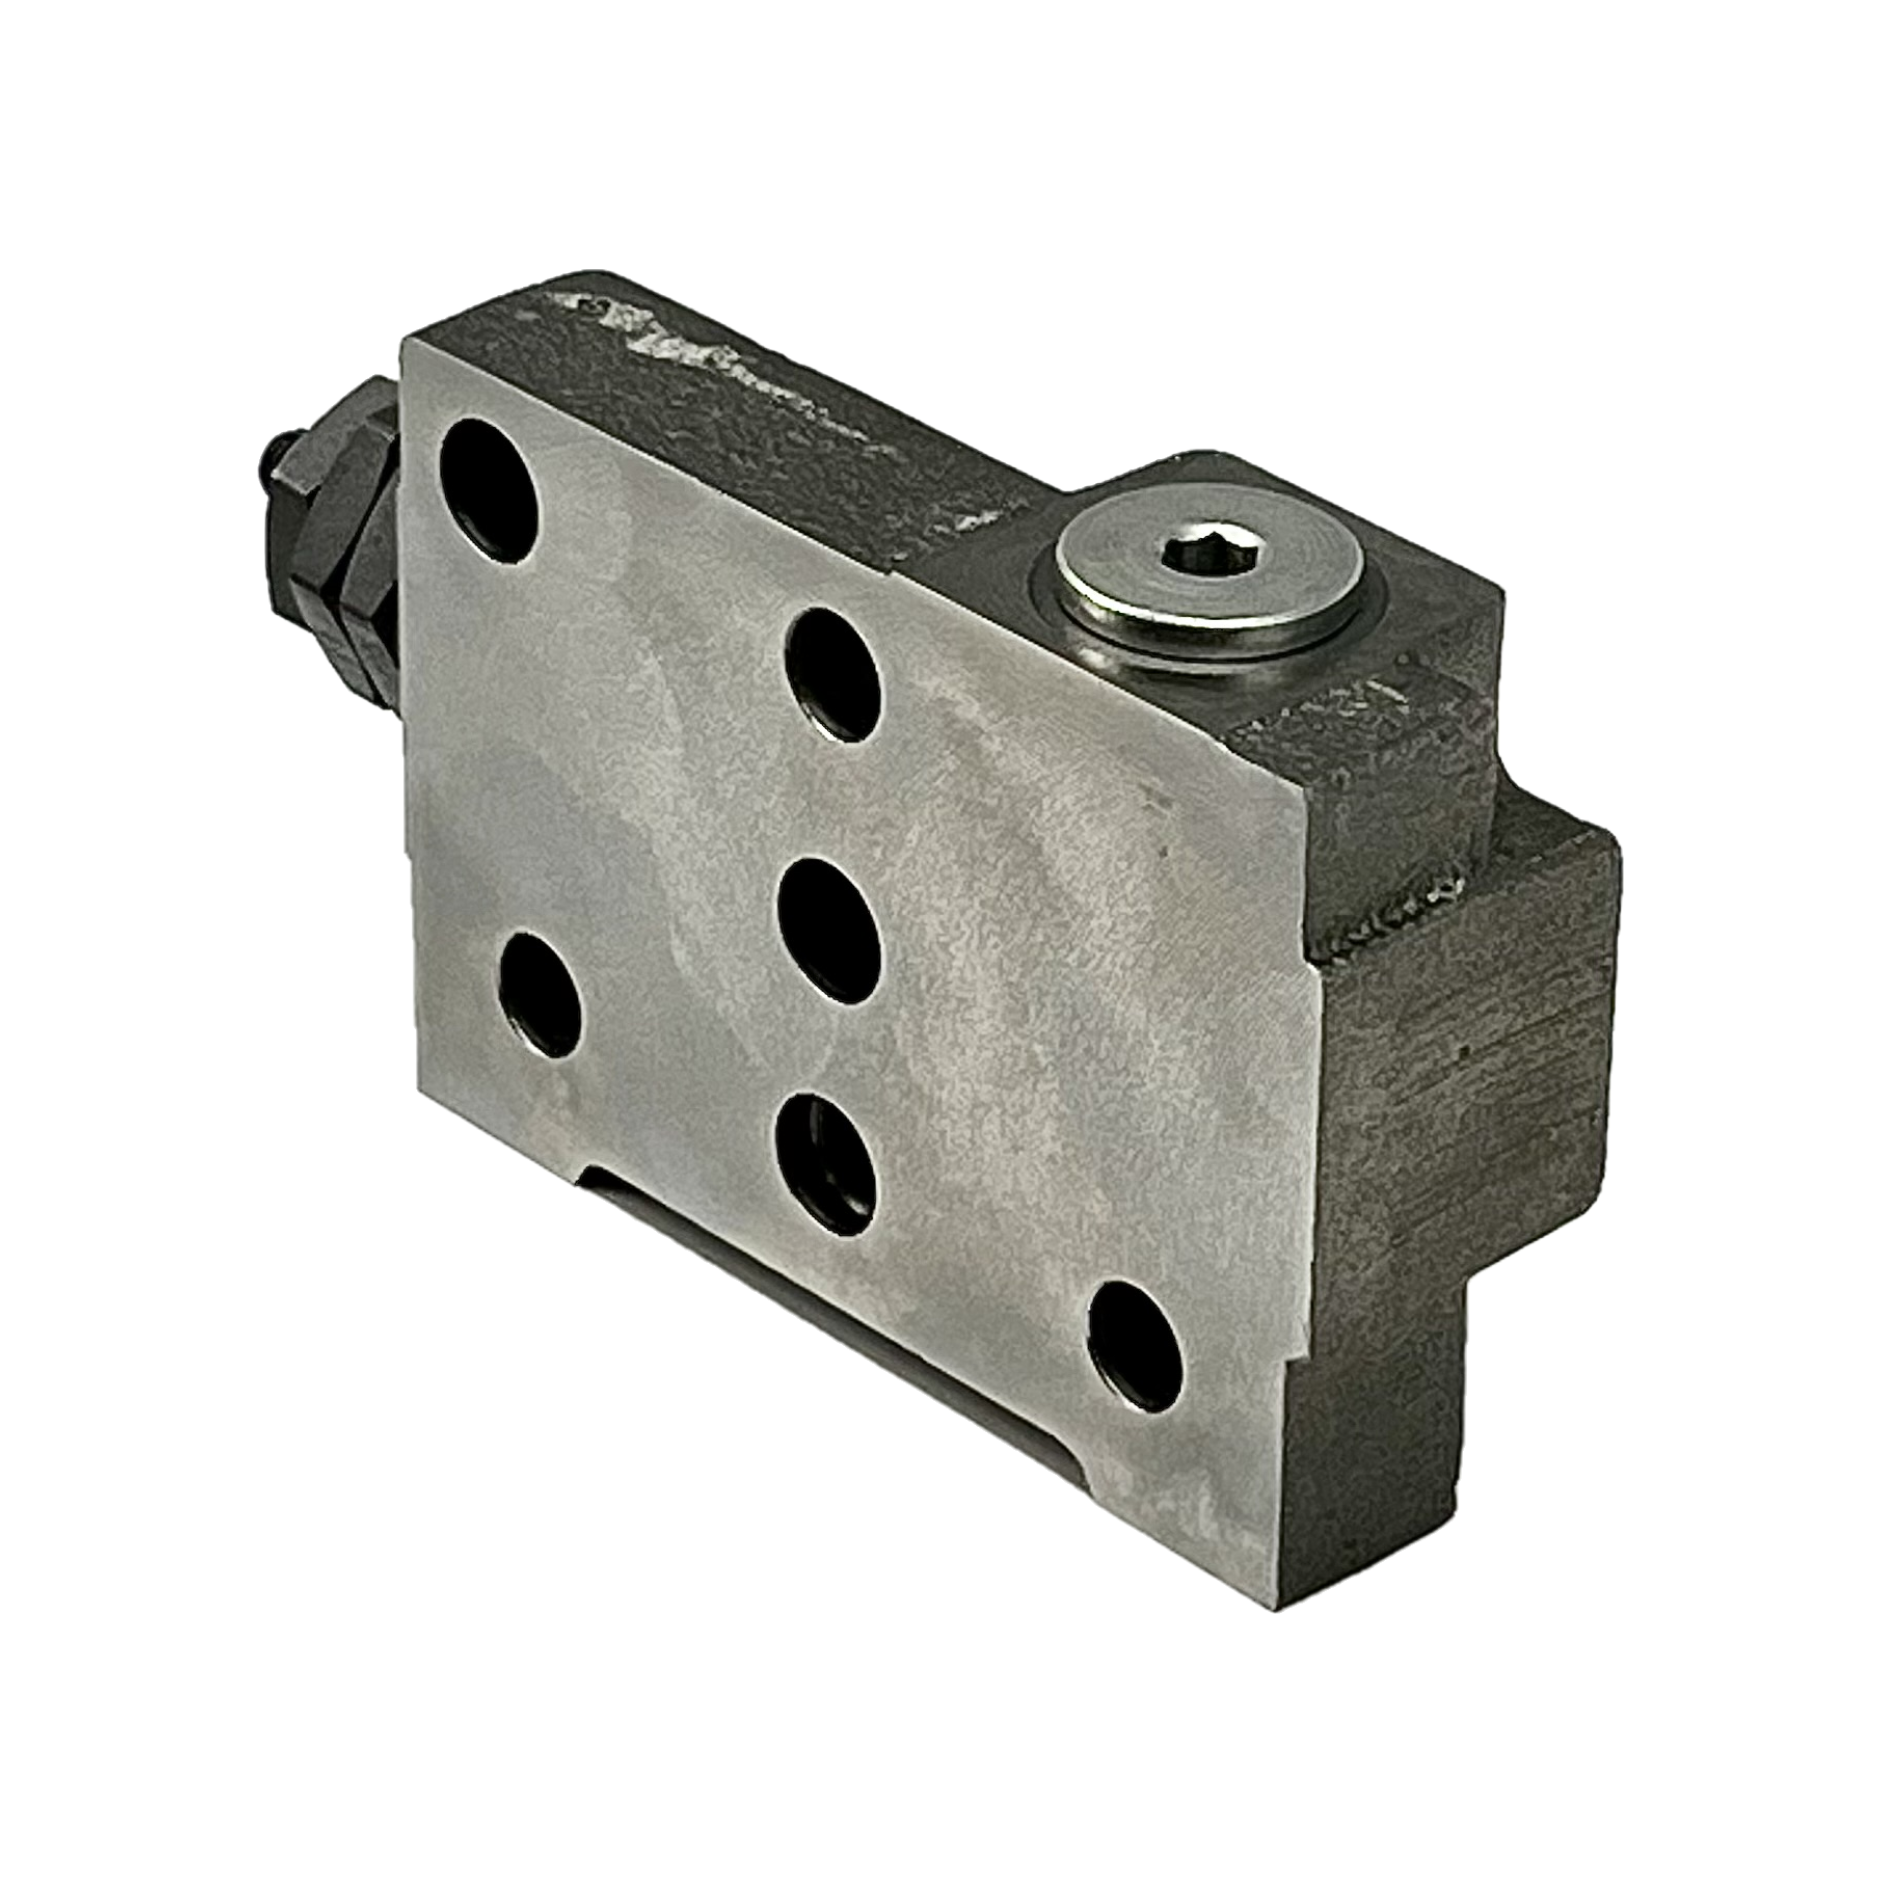 Q80 1/2" Standard Top/Side Ported Inlet c/w Relief